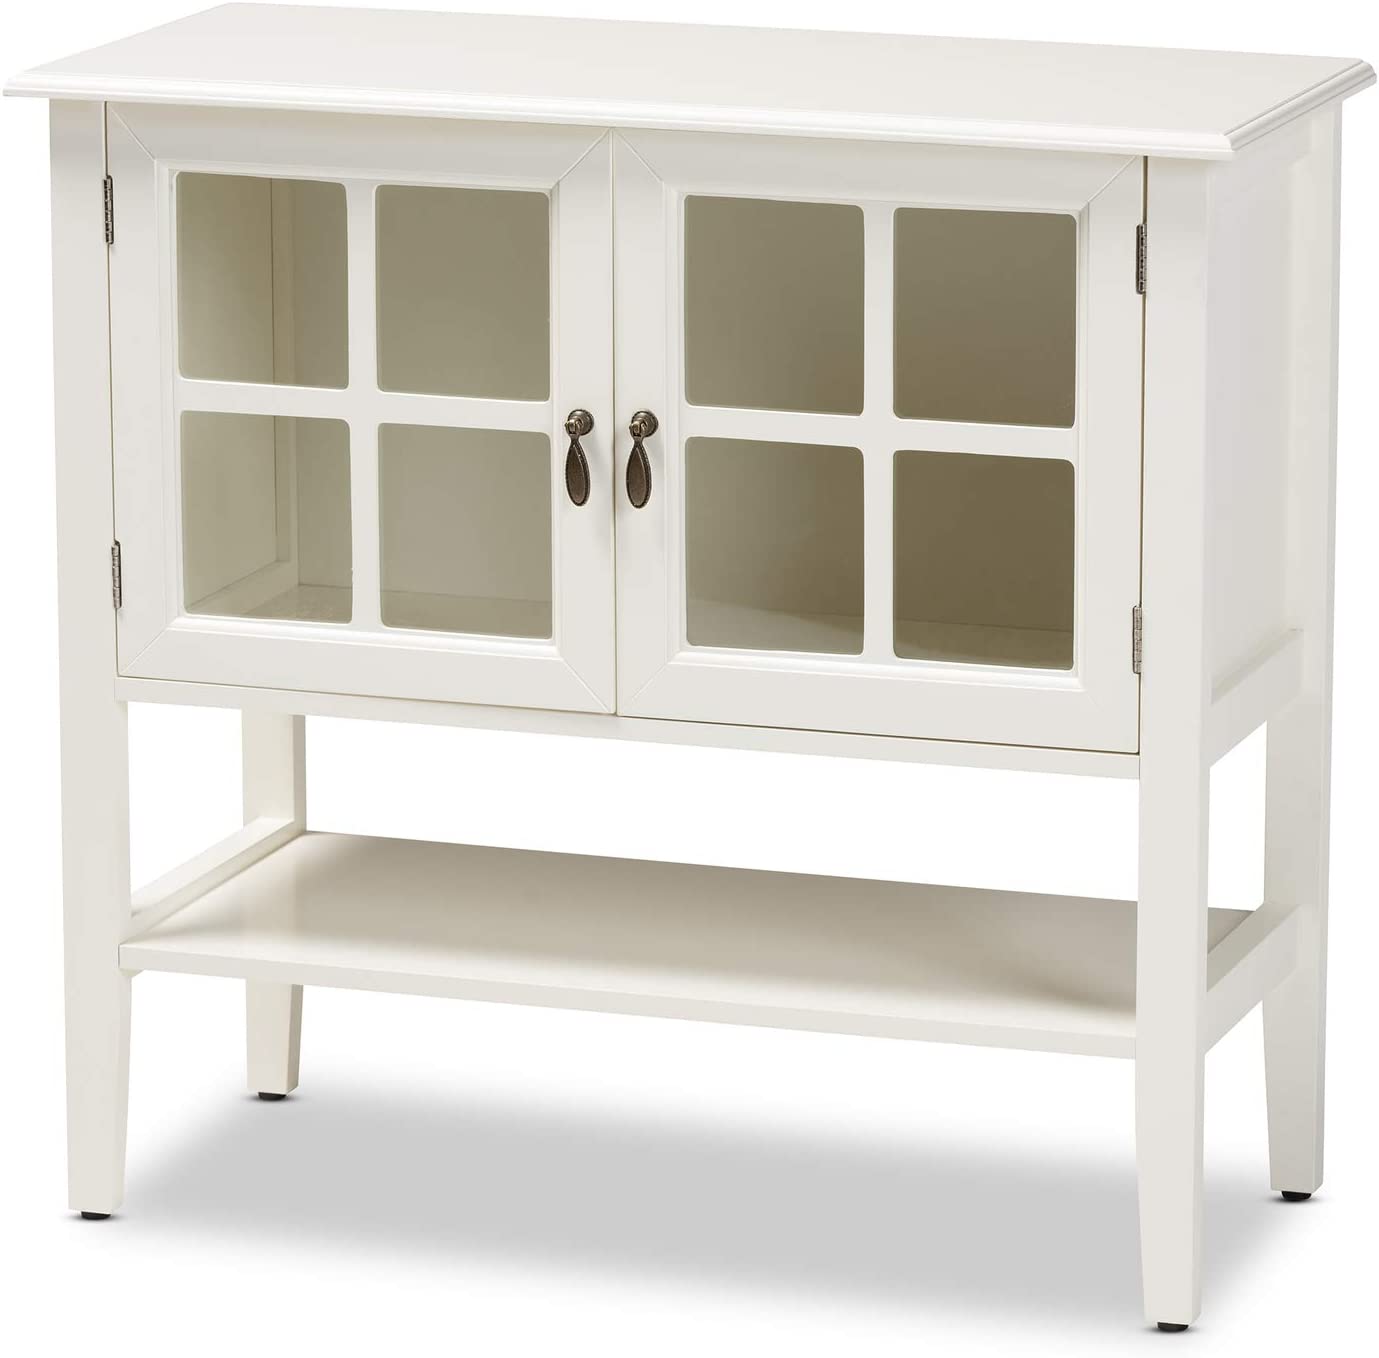 Baxton Studio Chauncey Classic and Traditional White Finished Wood and Glass 2-Door Kitchen Storage Cabinet